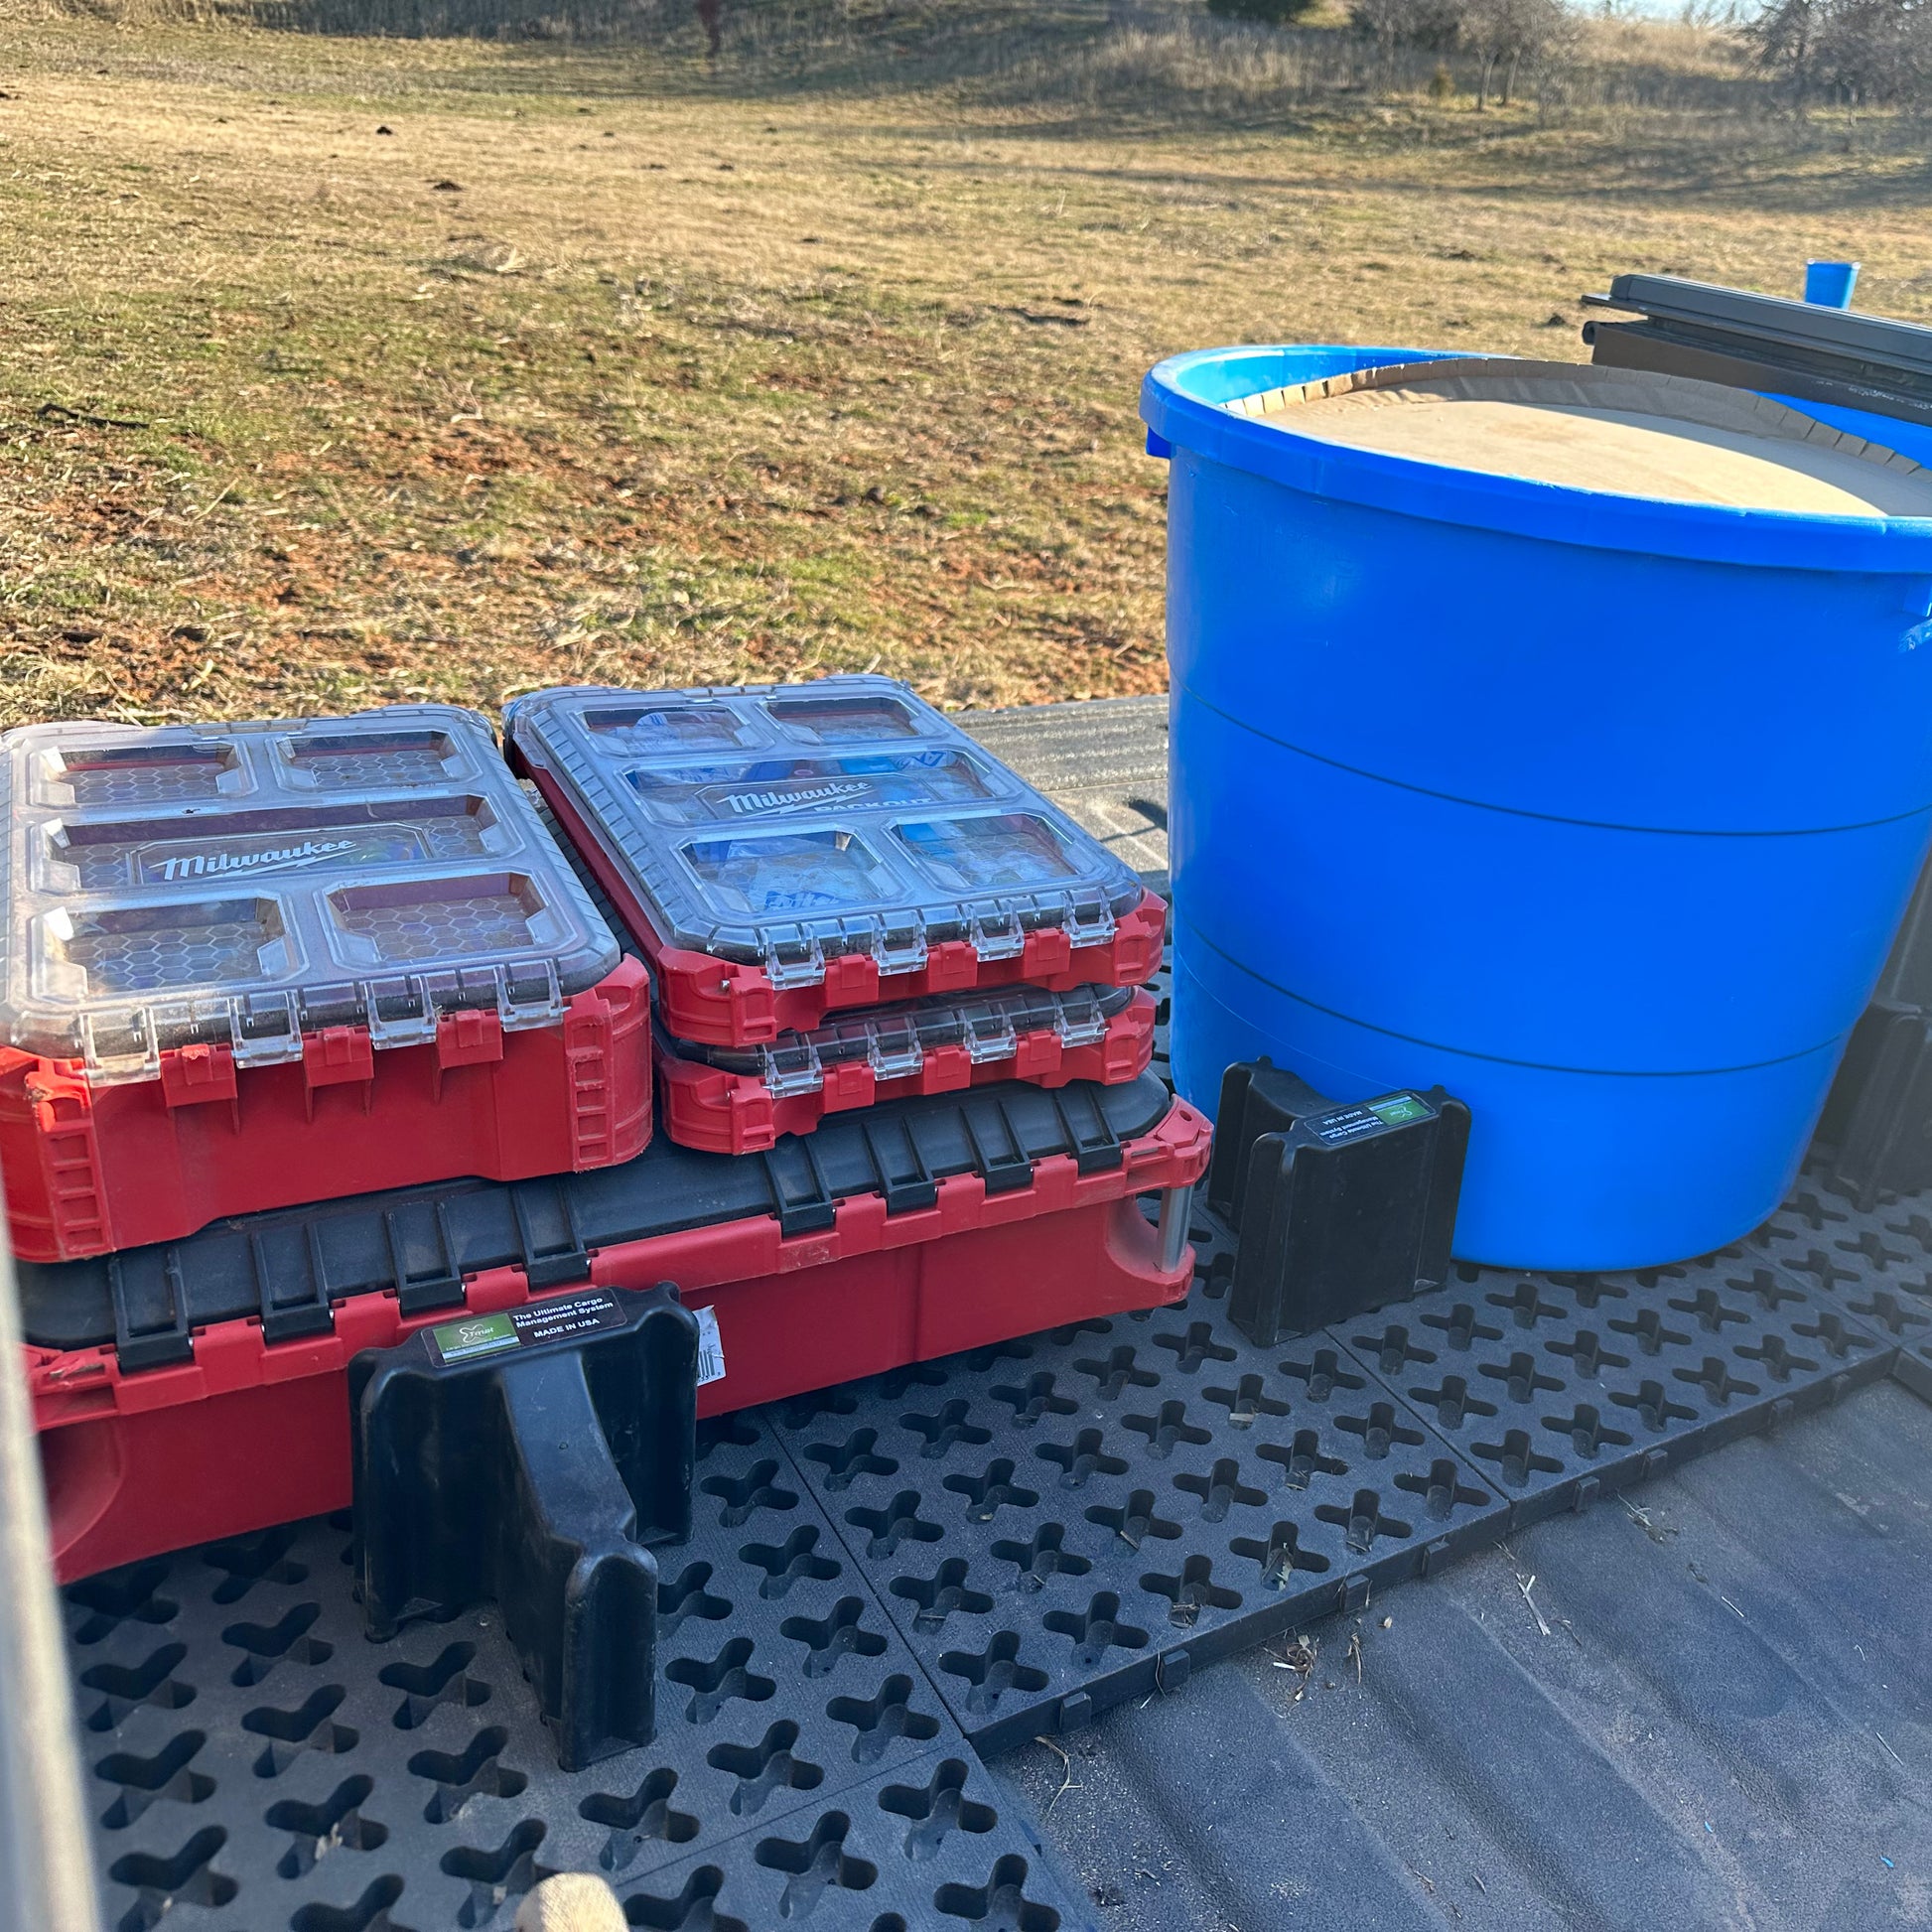 Tool boxes and a cattle protein tube sitting on Tmat in the back of a pickup on a farm.